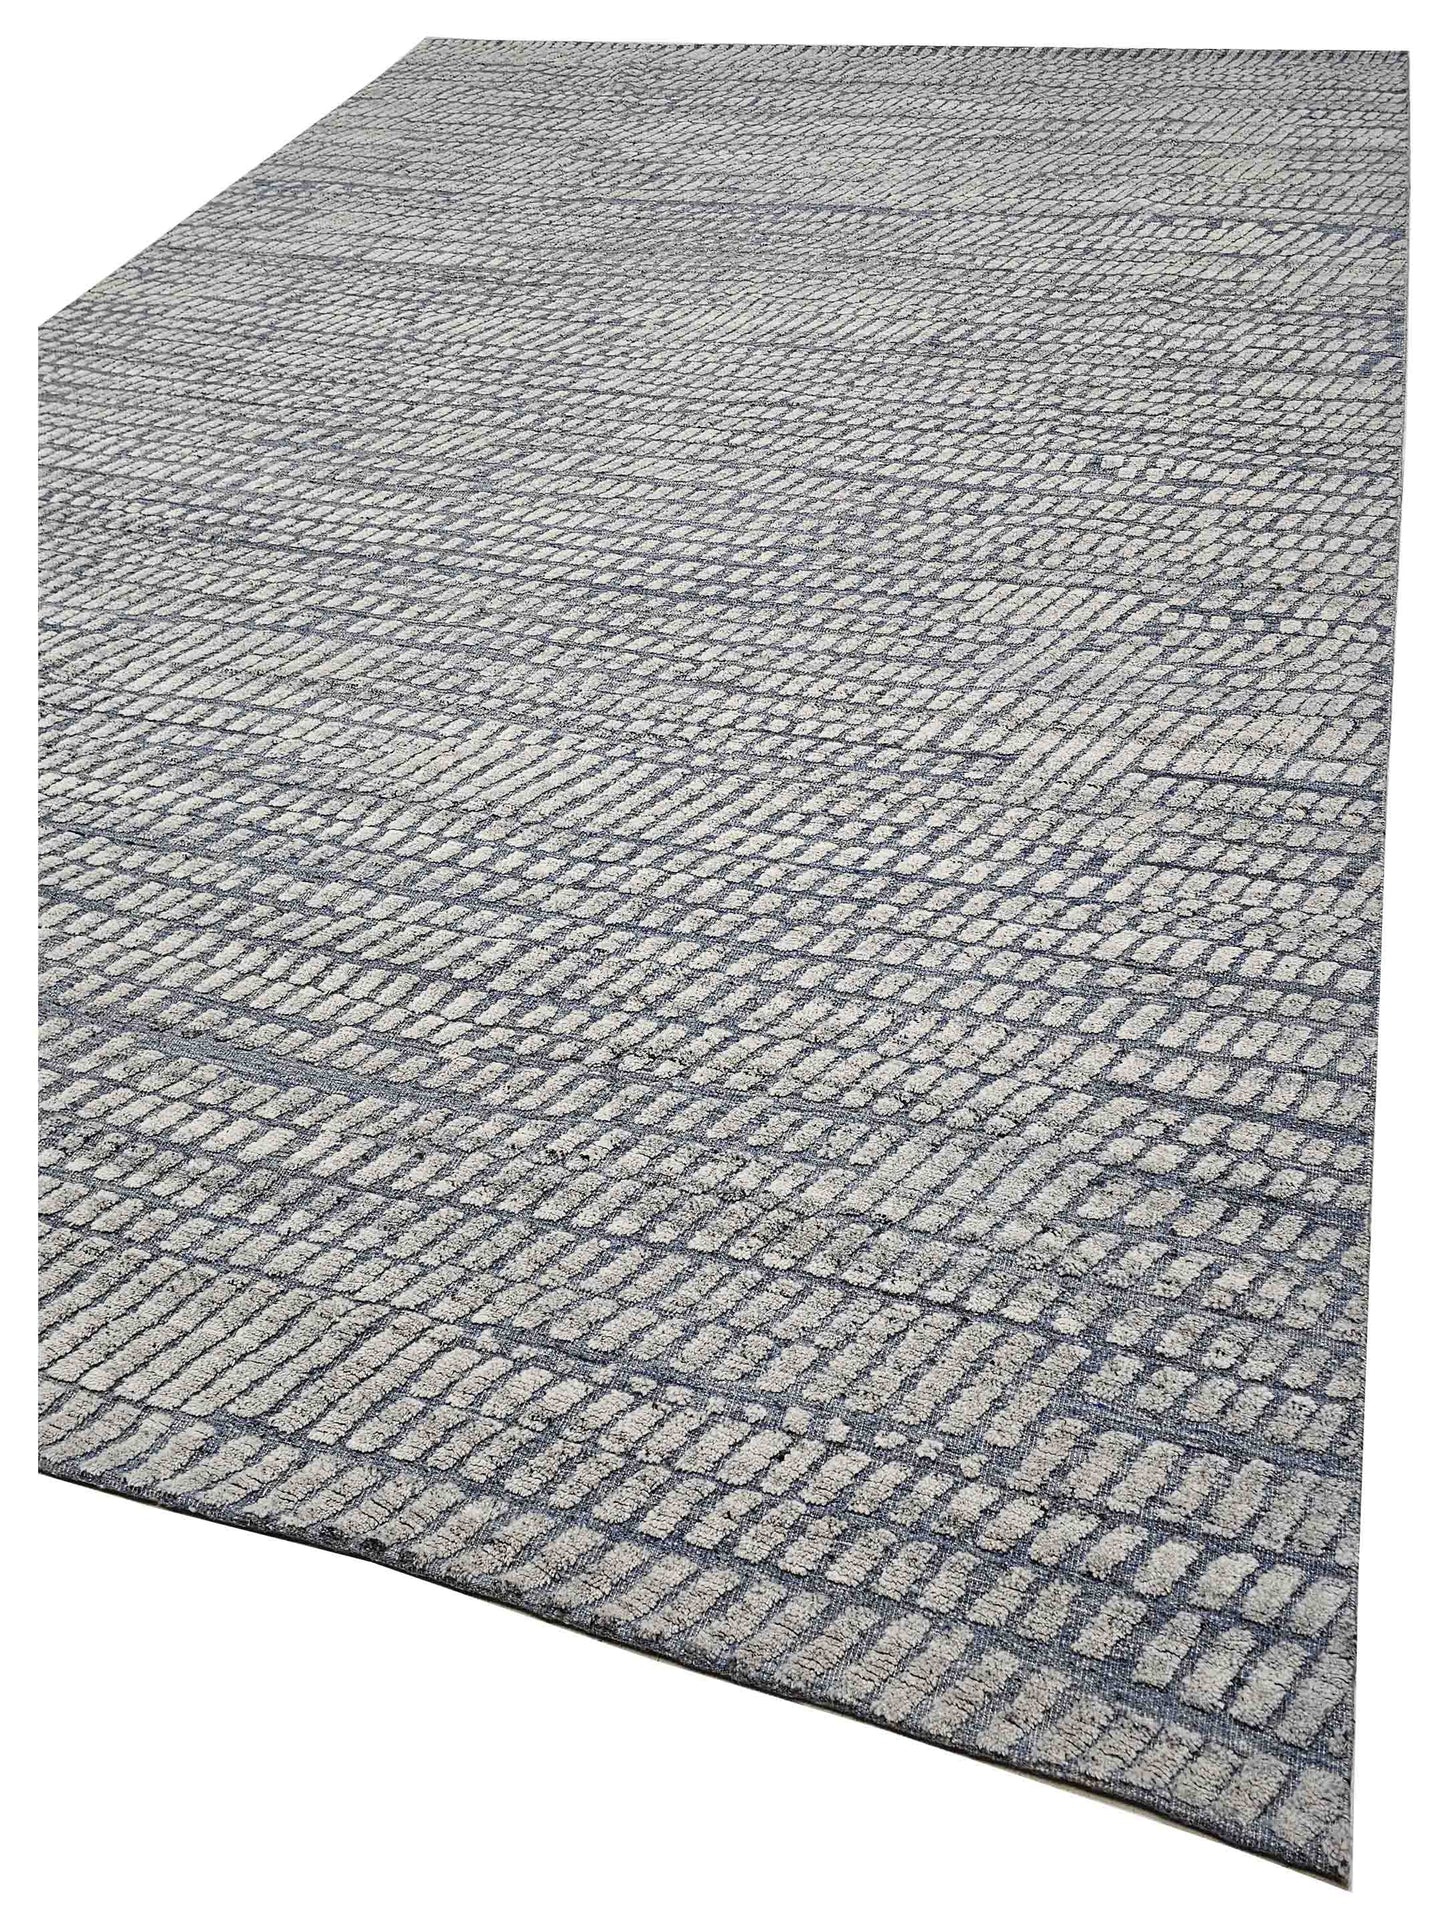 Artisan Harmony  Grey Blue Transitional Knotted Rug